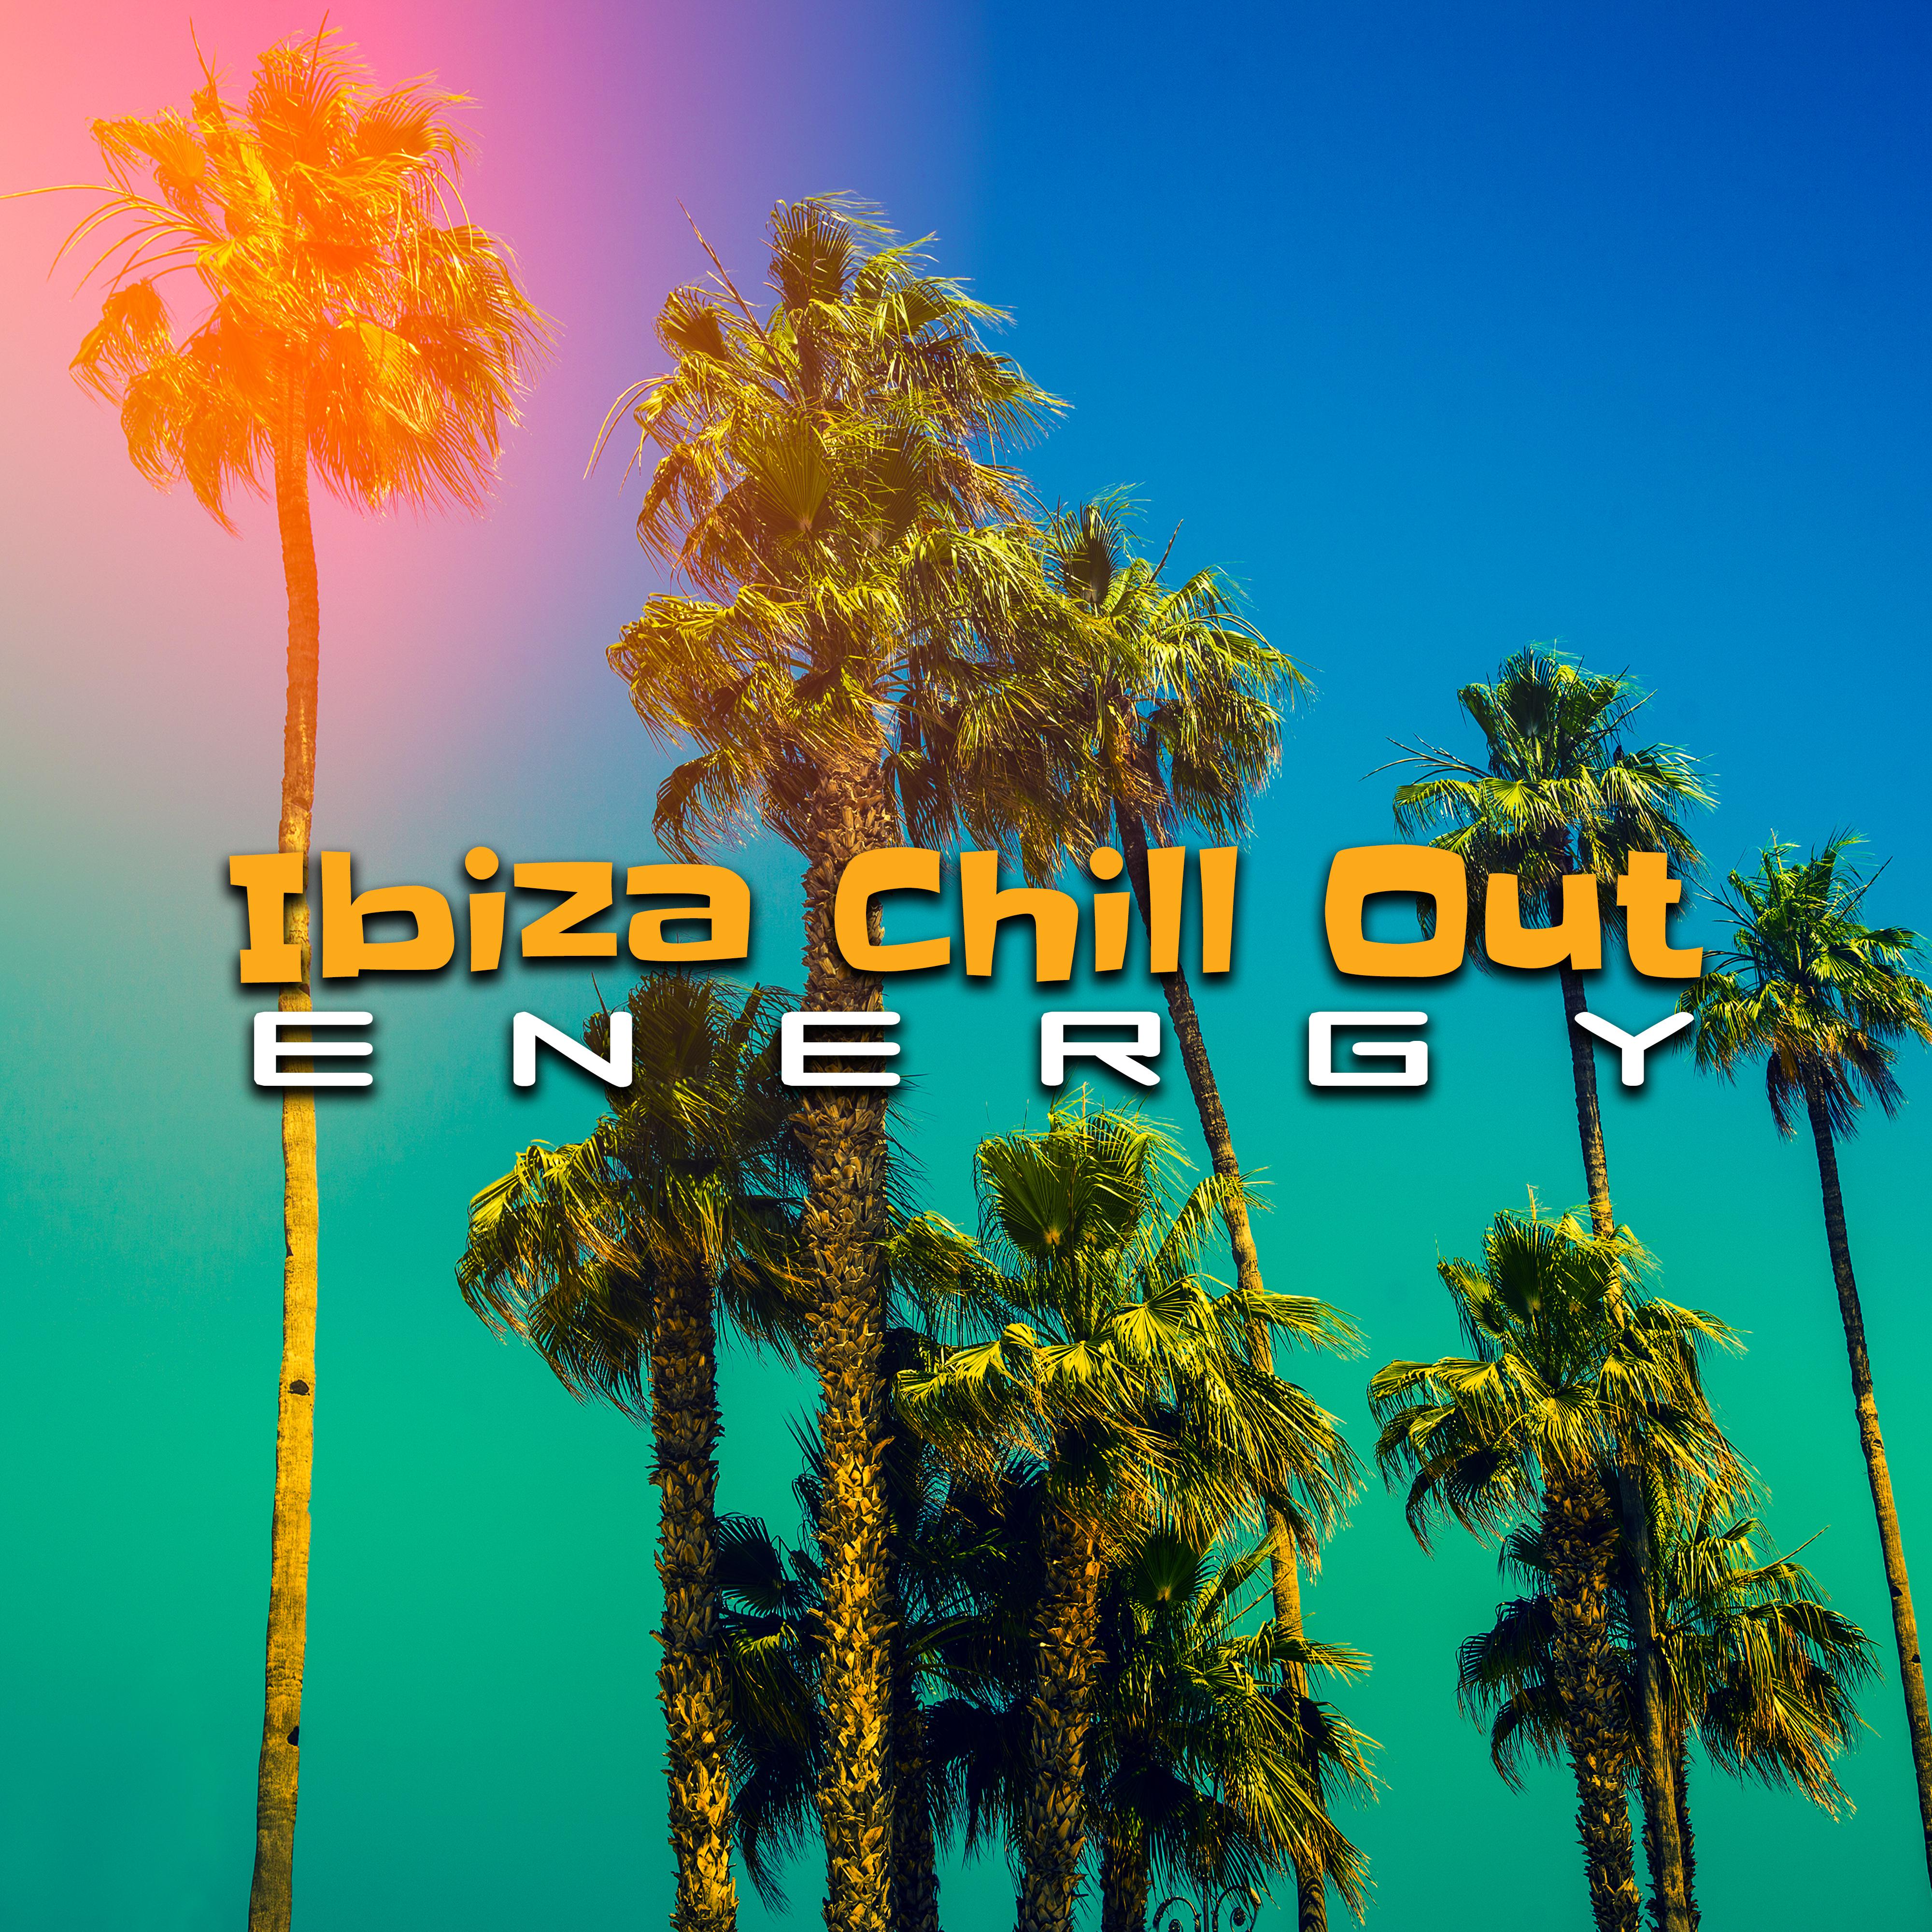 Ibiza Chill Out Energy – Party Chill Out, Beach Dancefloor, Colourful Drinks